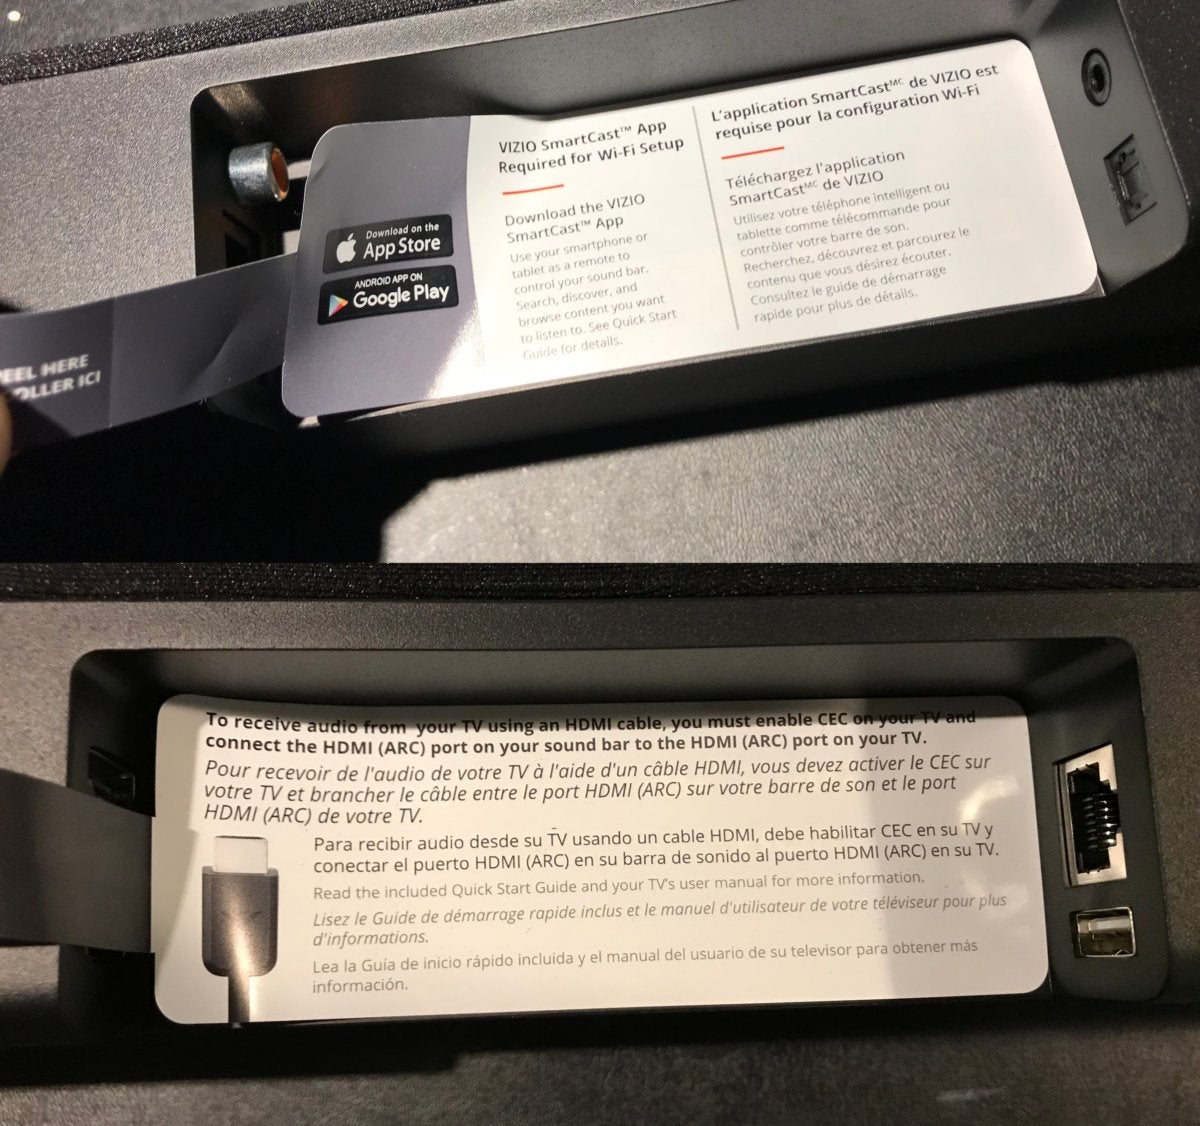 The sound bar's back has perfectly placed stickers giving users clear instructions.